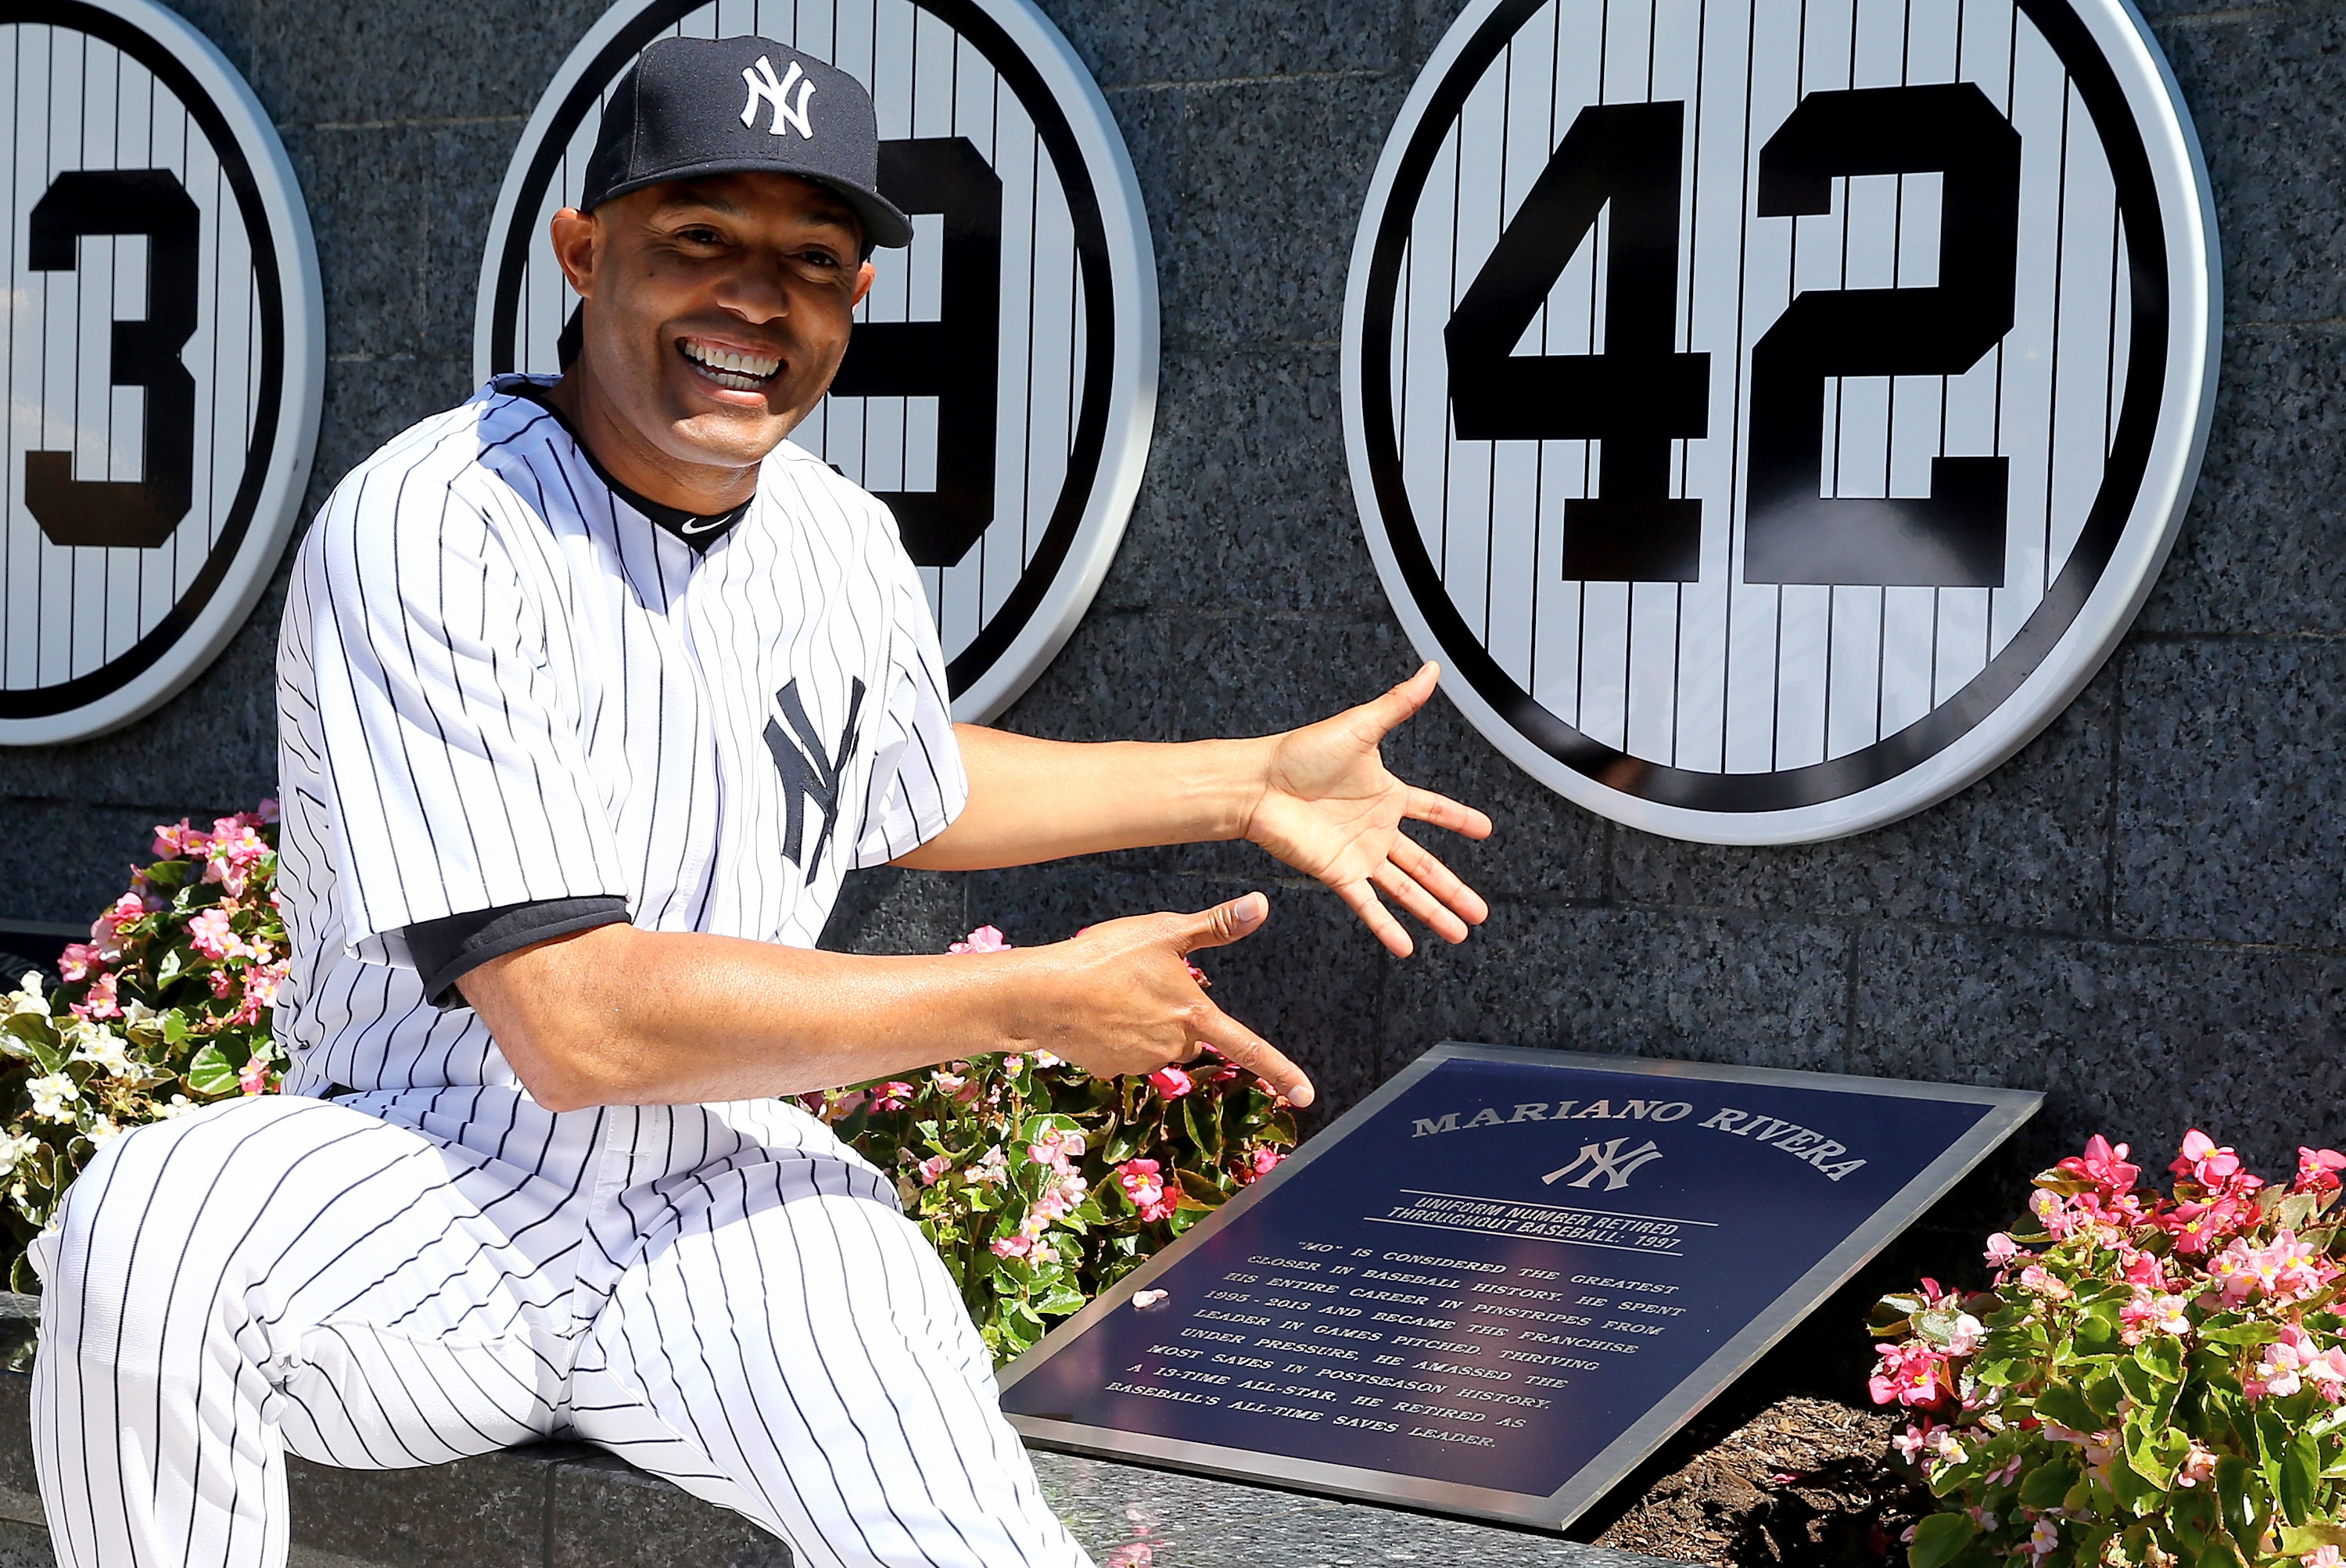 Yankees Retired Numbers - Who Are The 22 Yankees Who Wore